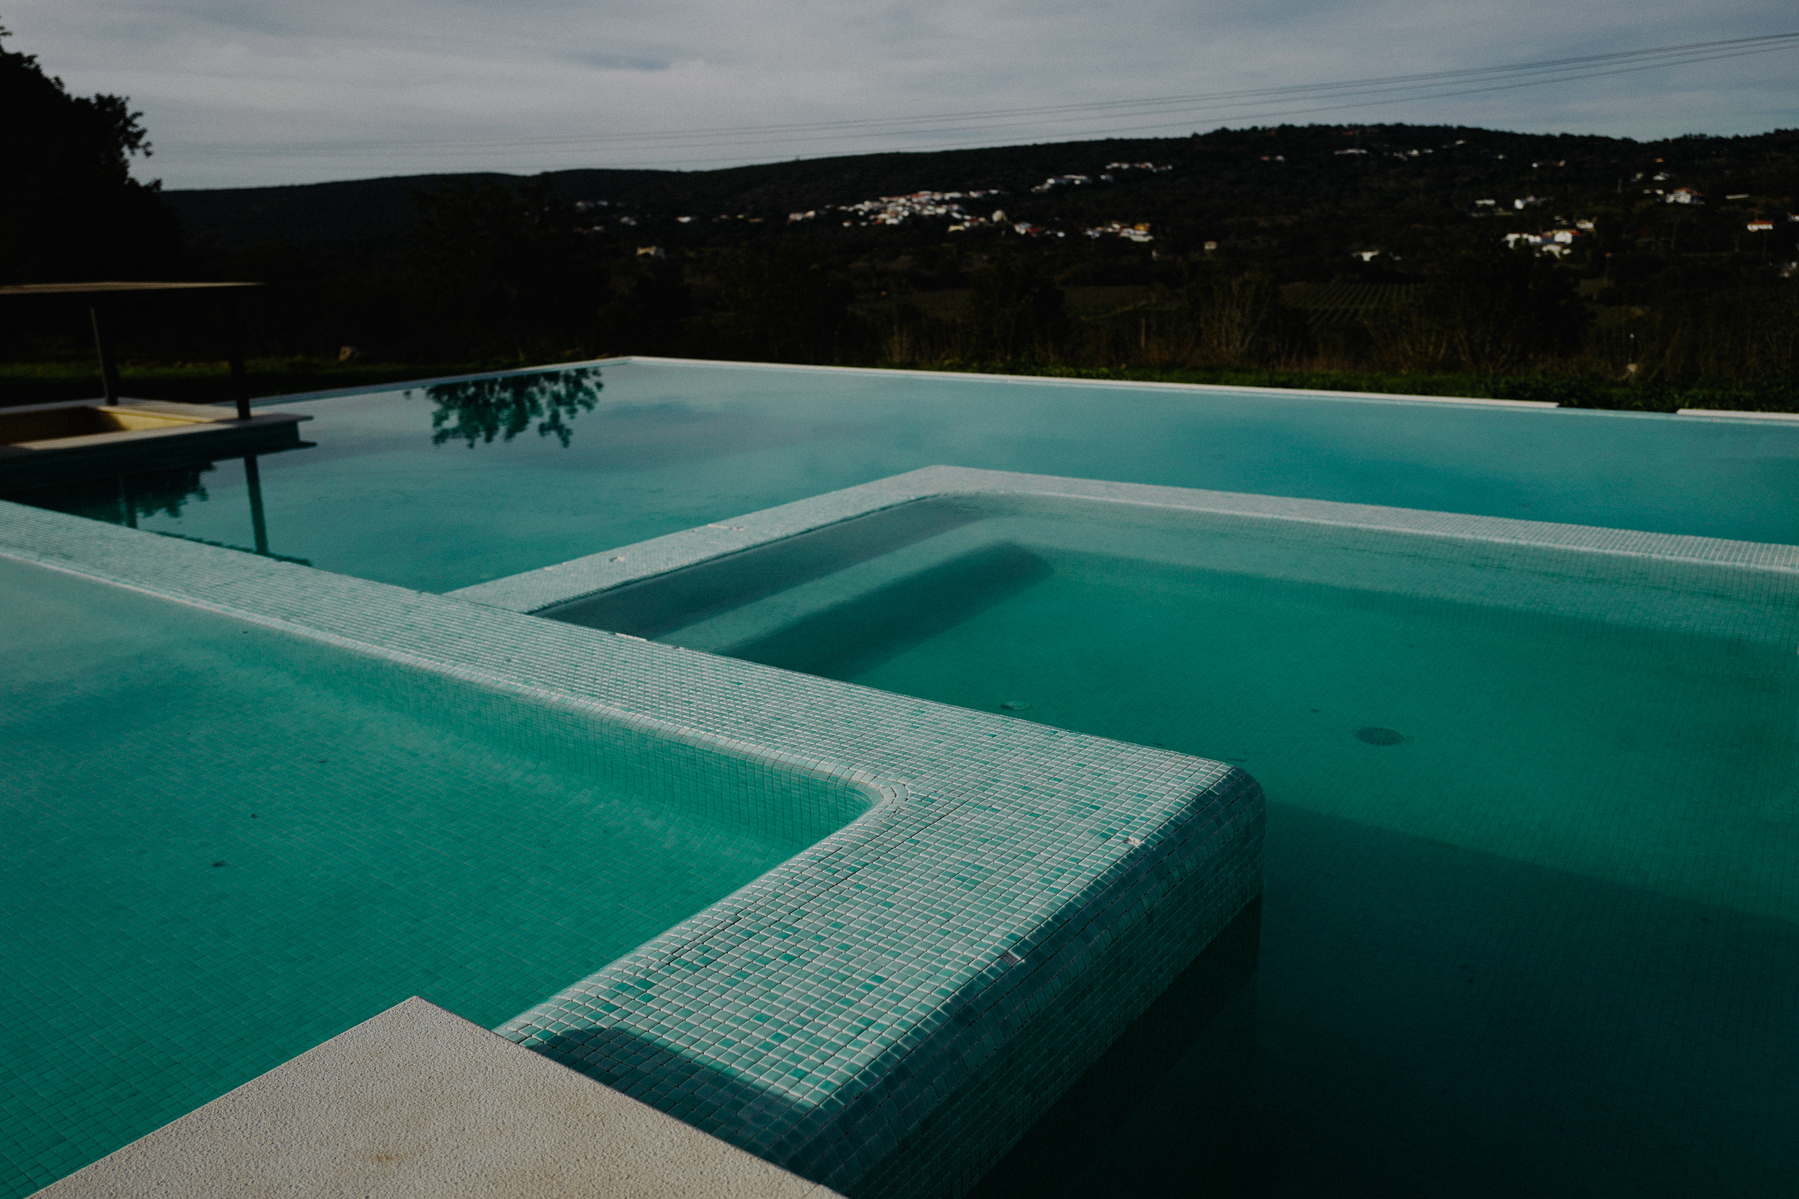 An outdoor swimming pool with clear blue water bordered by light poolside decking. The pool features a built-in step or bench, and is set against a backdrop of scenic green hills.